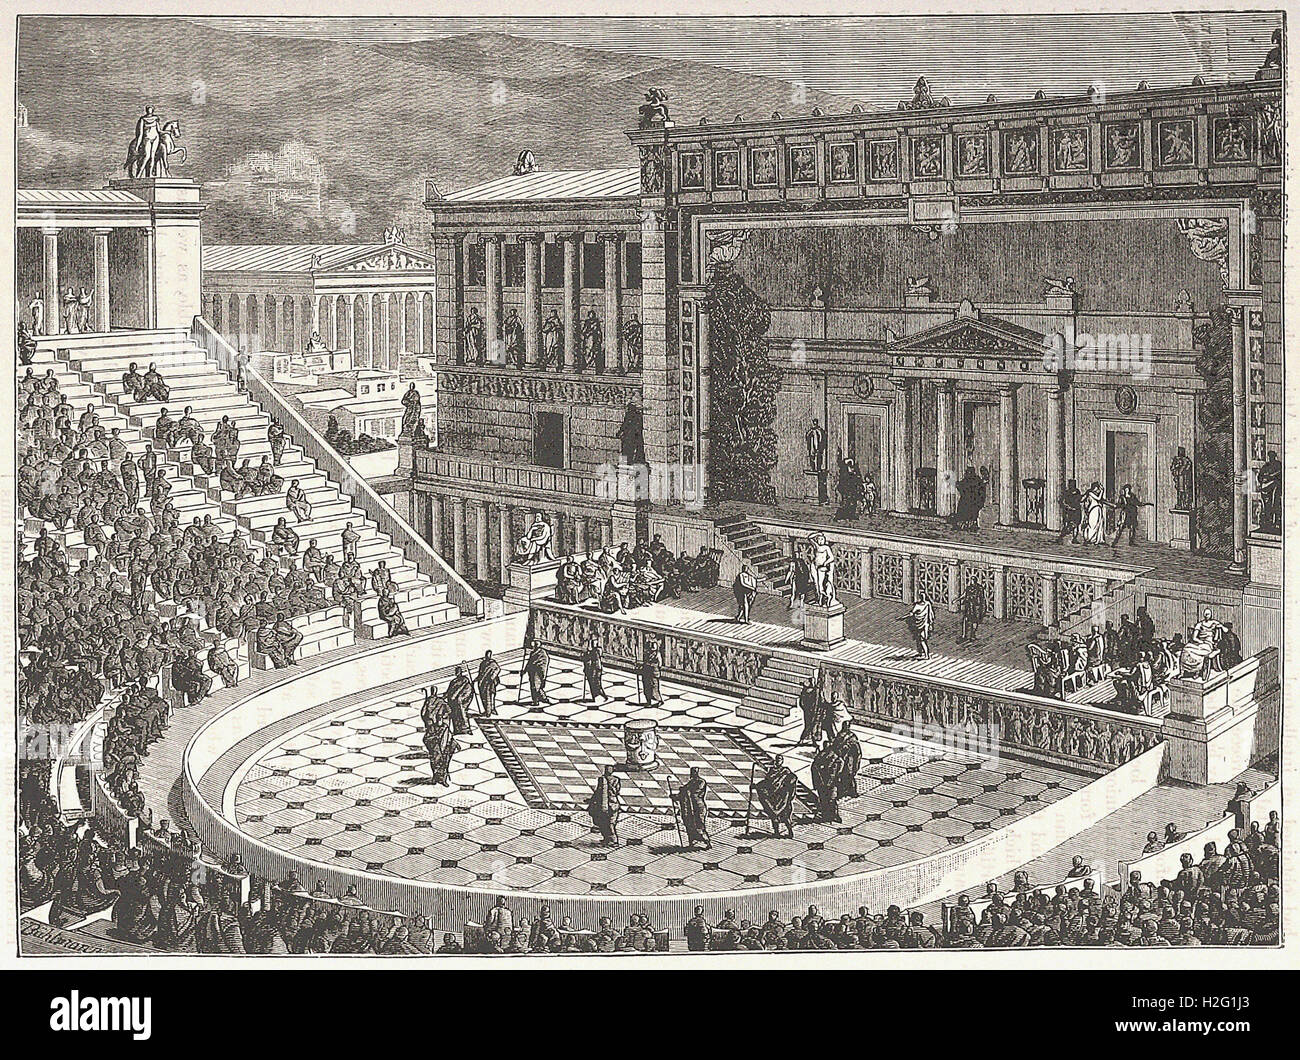 THEATRE OF DIONYSUS AT ATHENS - from 'Cassell's Illustrated Universal History' - 1882 Stock Photo